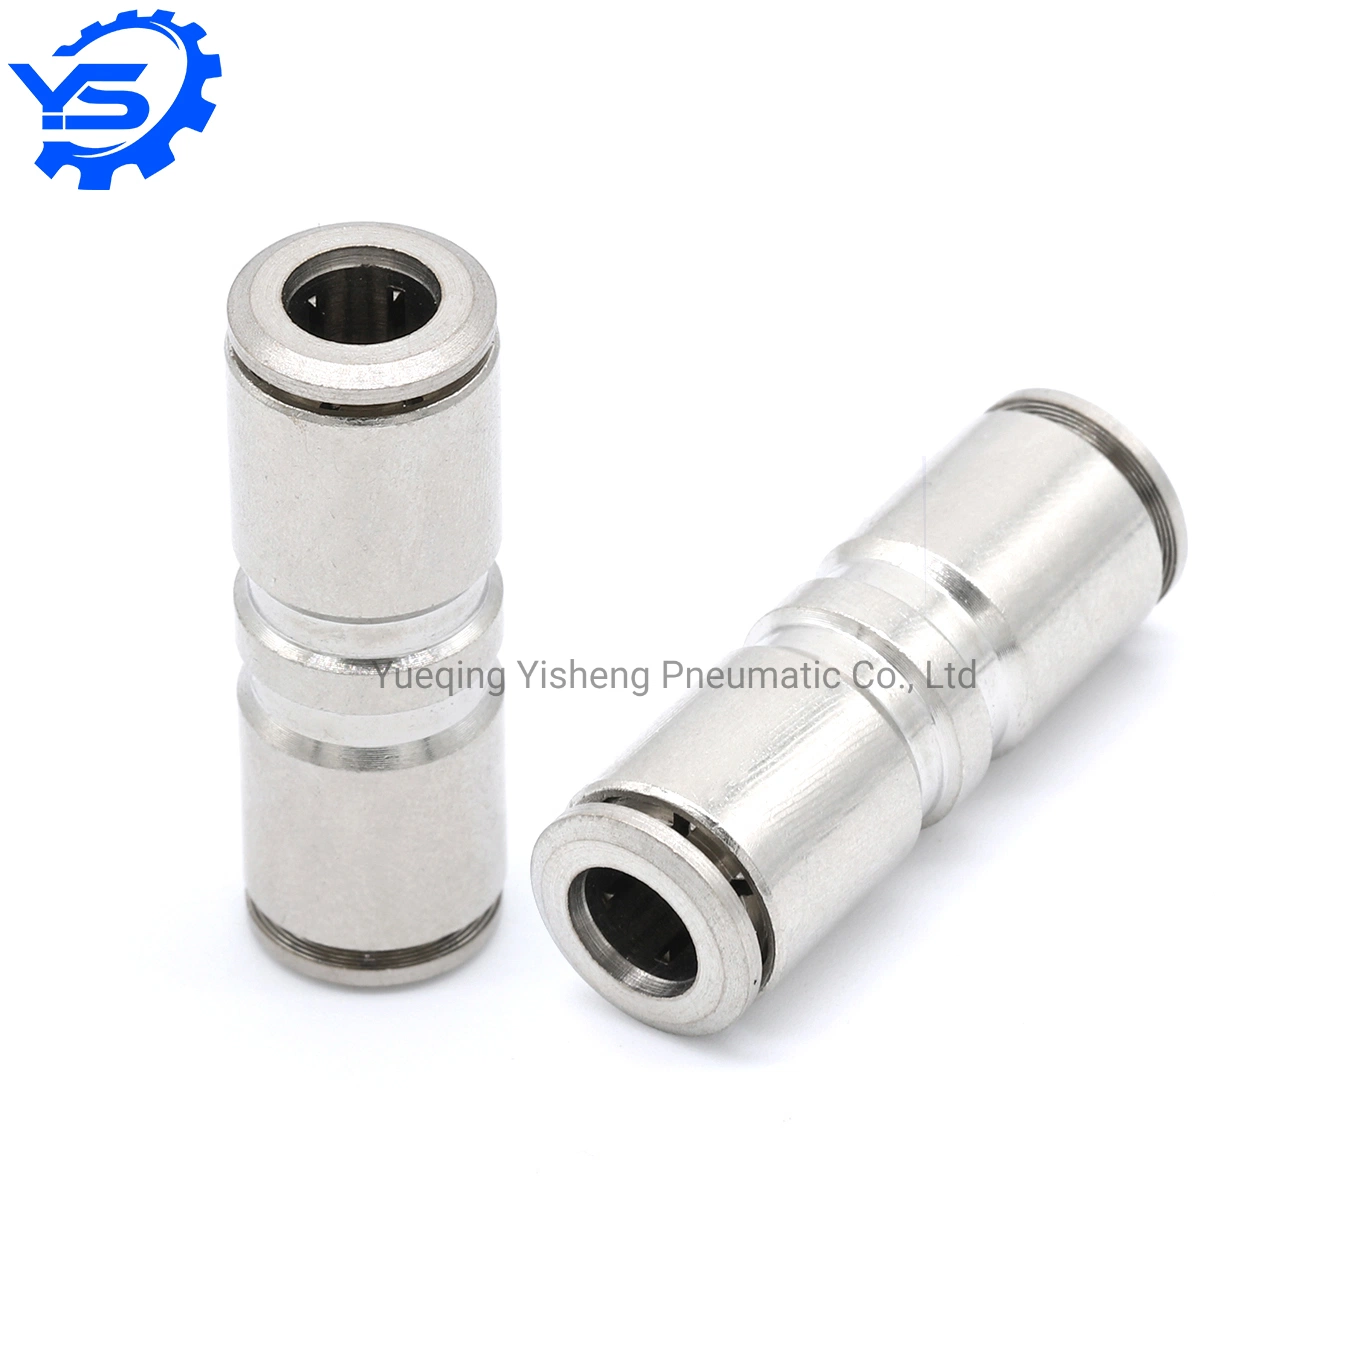 PU Series Metall Fitting Brass Material with Nickel Plating Pneumatic Air Tube Fitting One Touch Push in Hose Pneumatic Fittings PU4/6/8/10/12